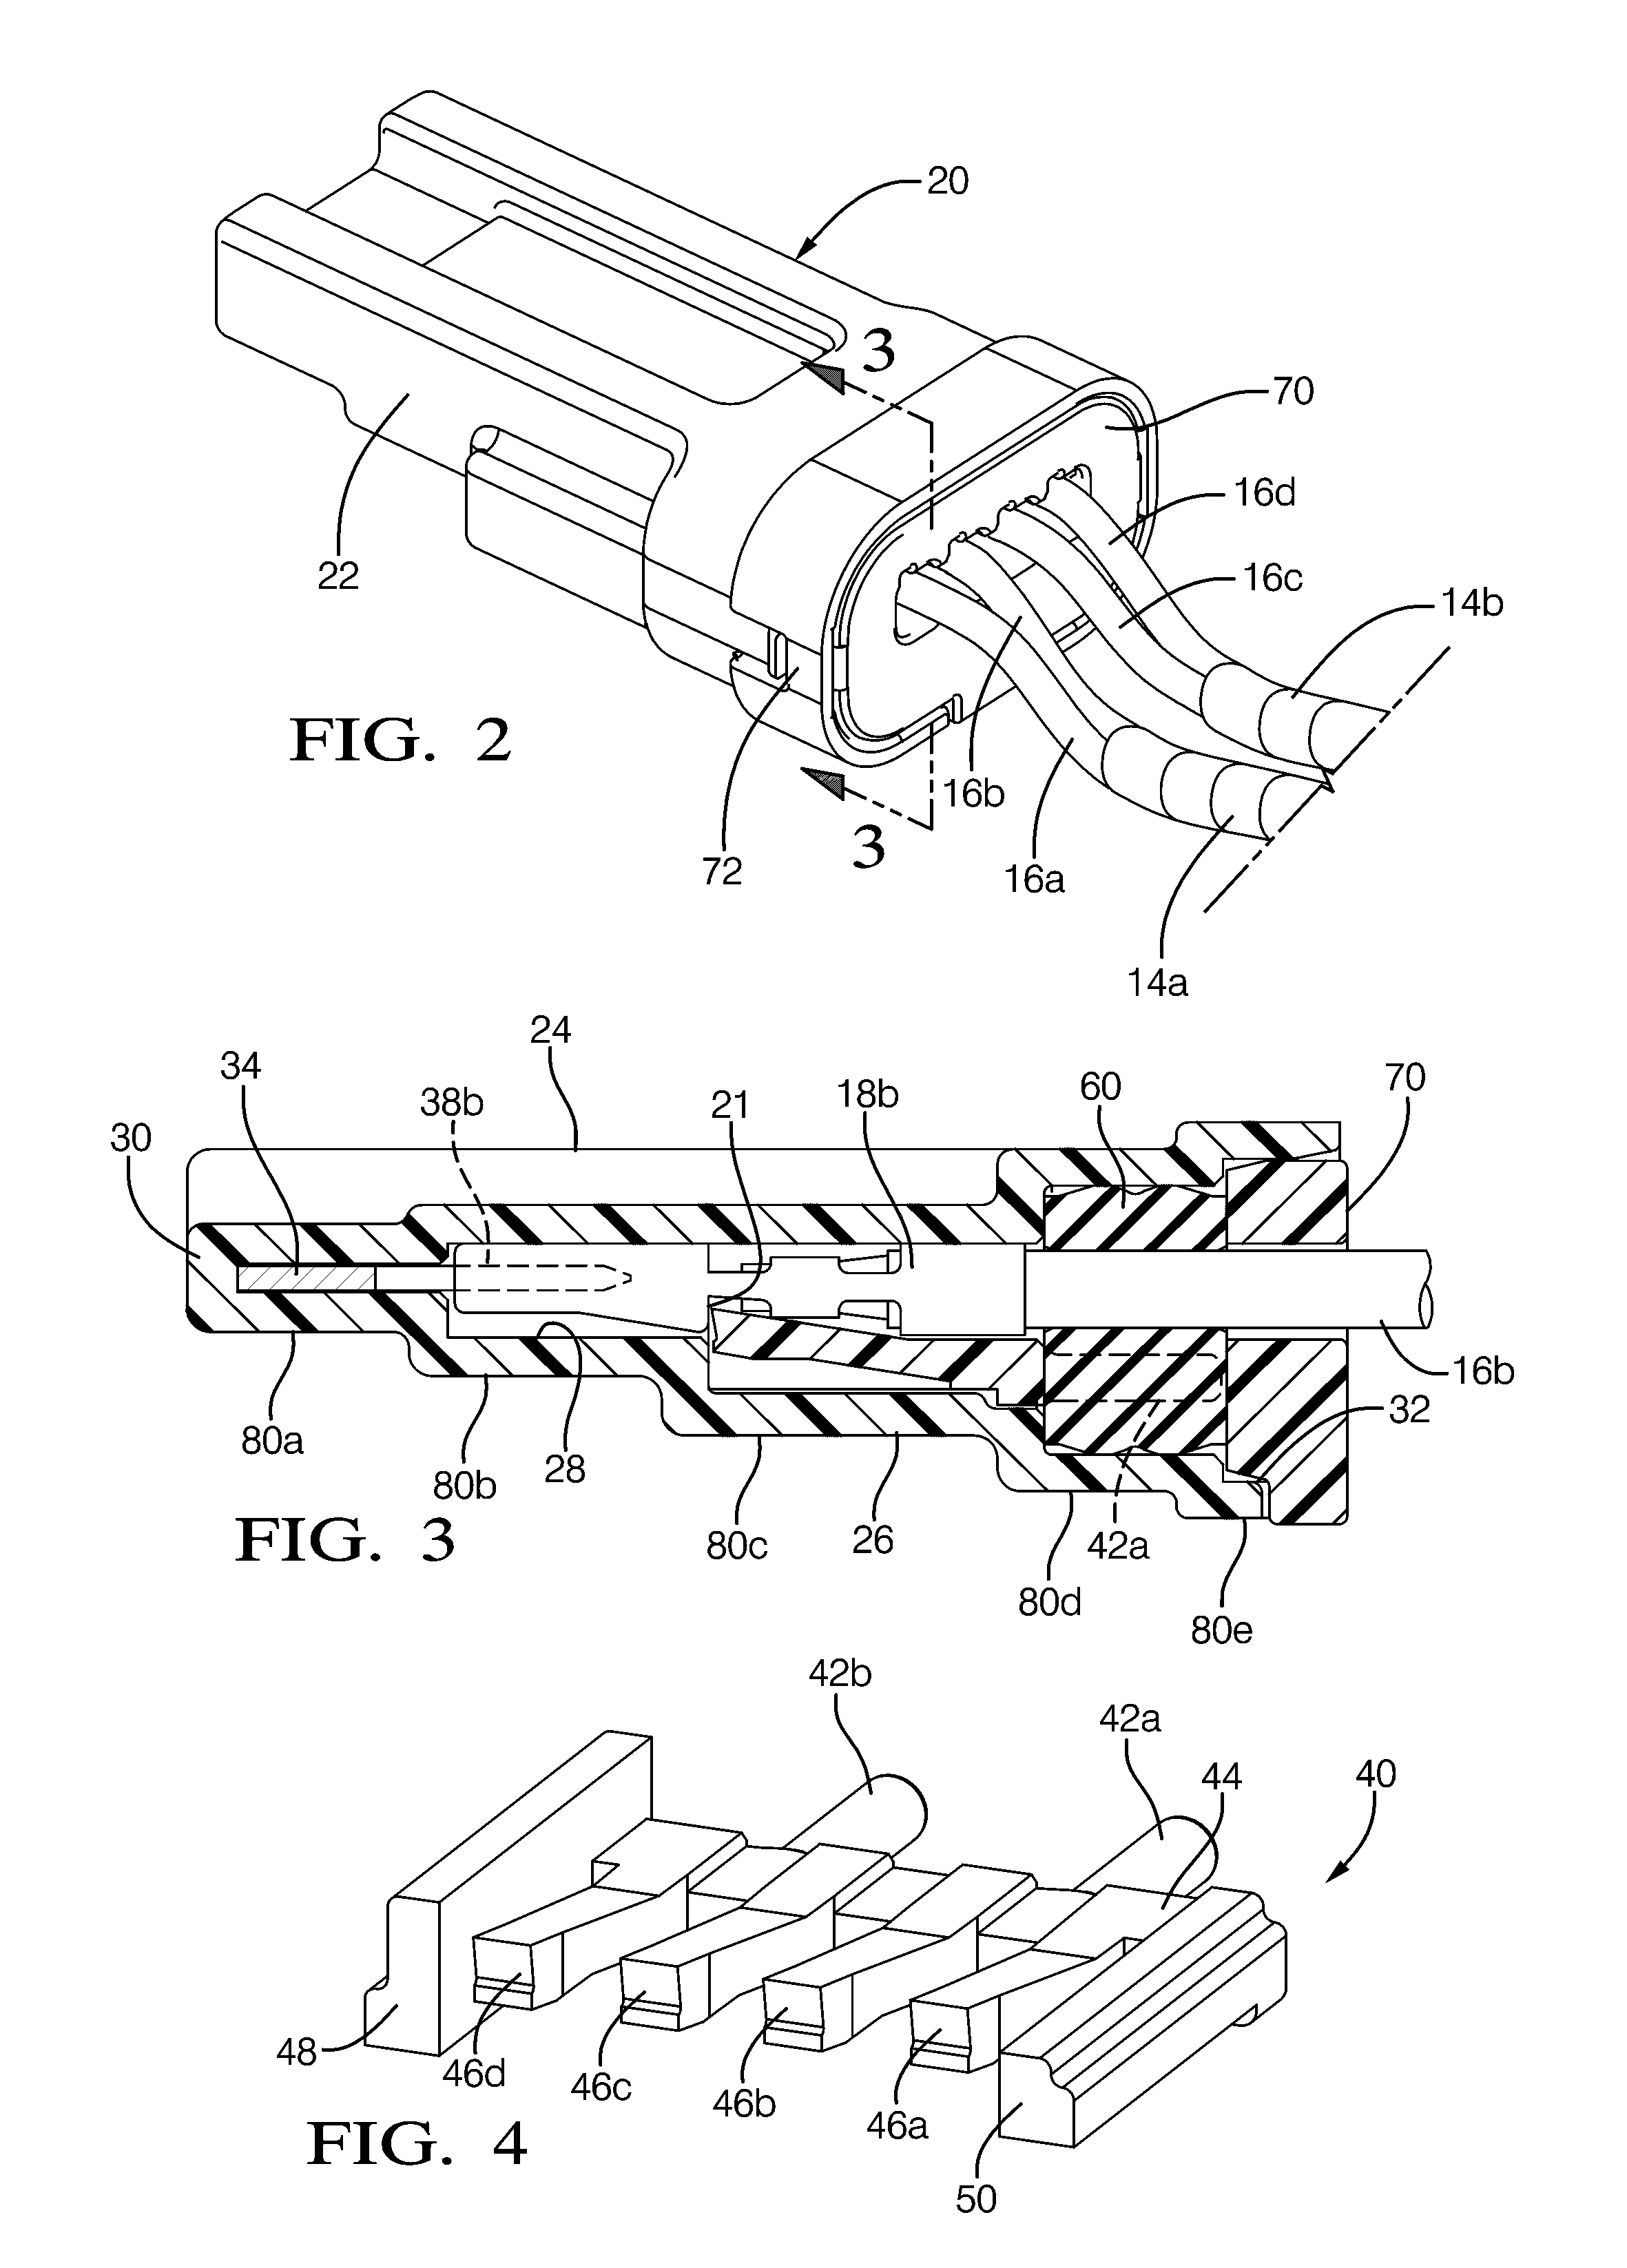 Sealed electrical splice assembly